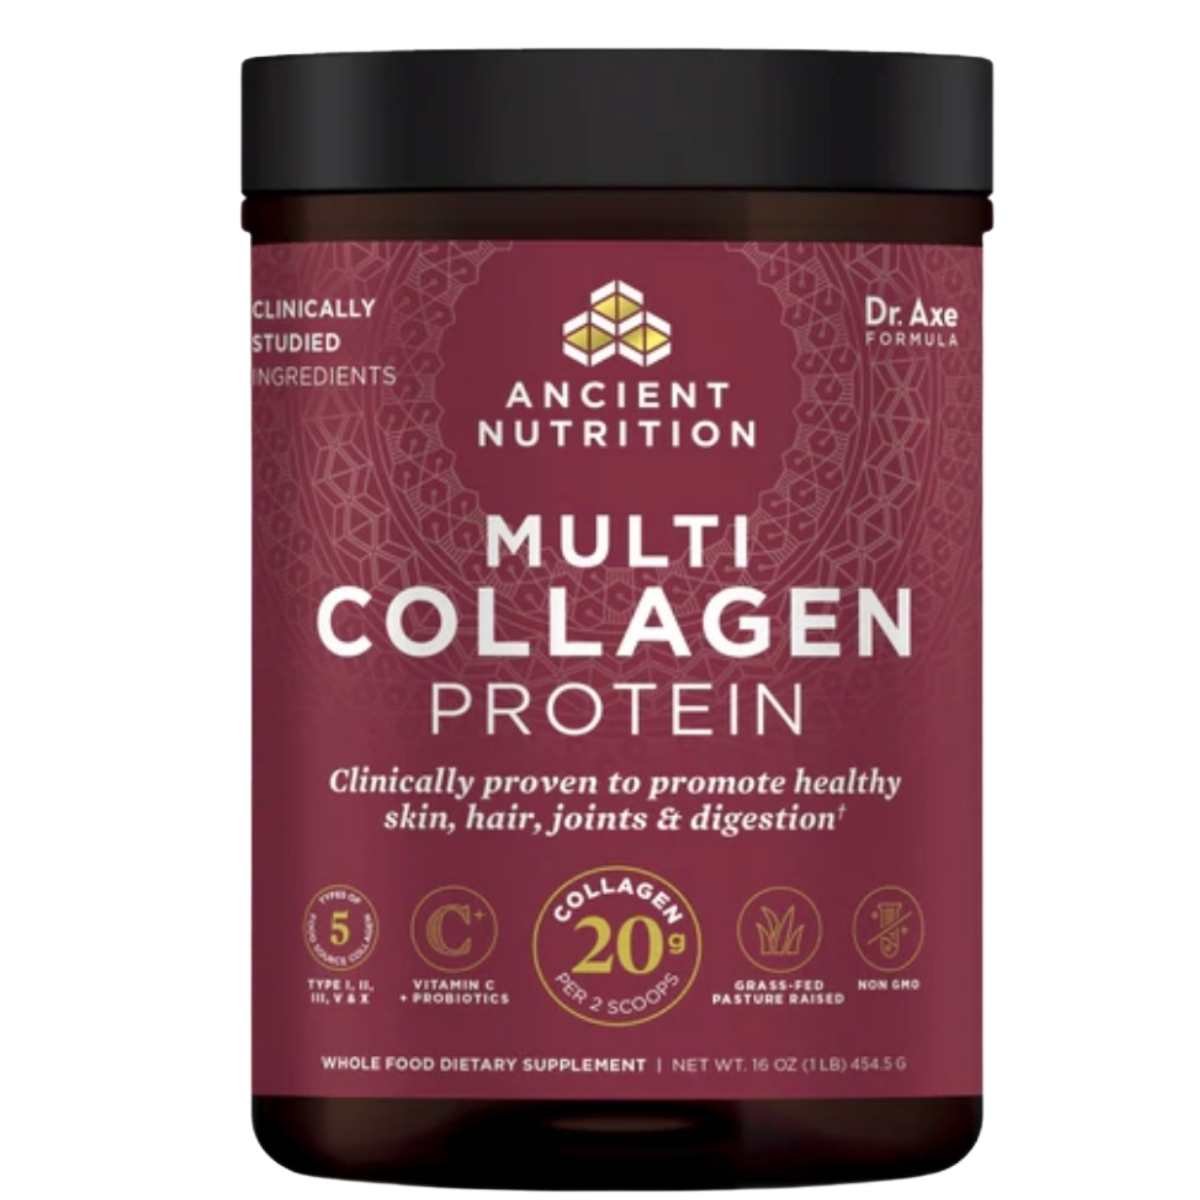 NativePath Collagen Peptides - Hydrolyzed Type 1 & 3 Collagen. Keto & Paleo  Grass-Fed Protein Powder for Hair, Skin, Nails, Bones, Joints, Digestion